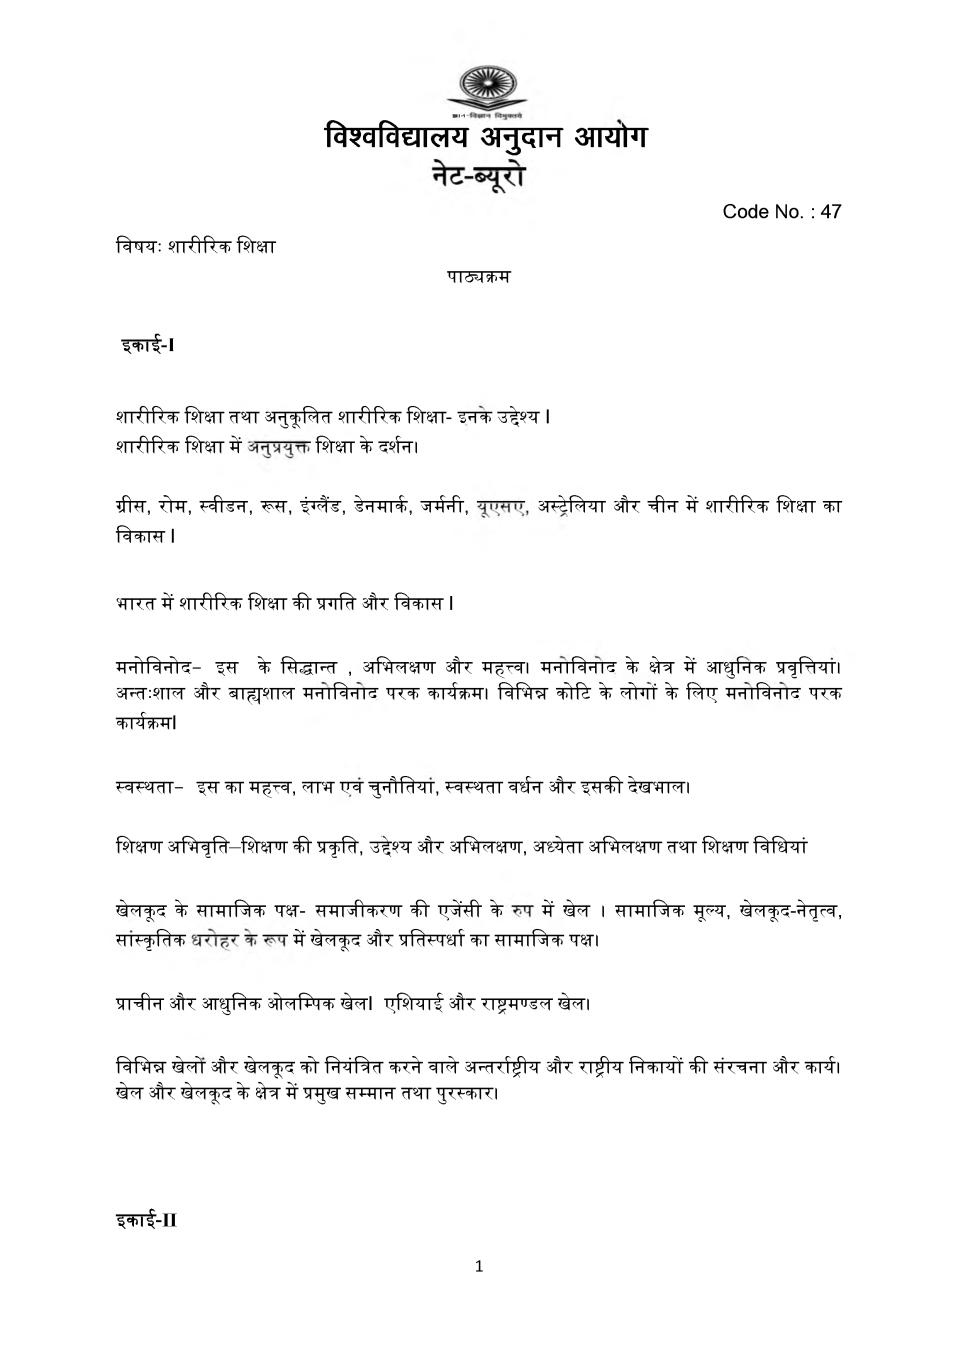 UGC NET Syllabus for Physical Education 2020 in Hindi - Page 1